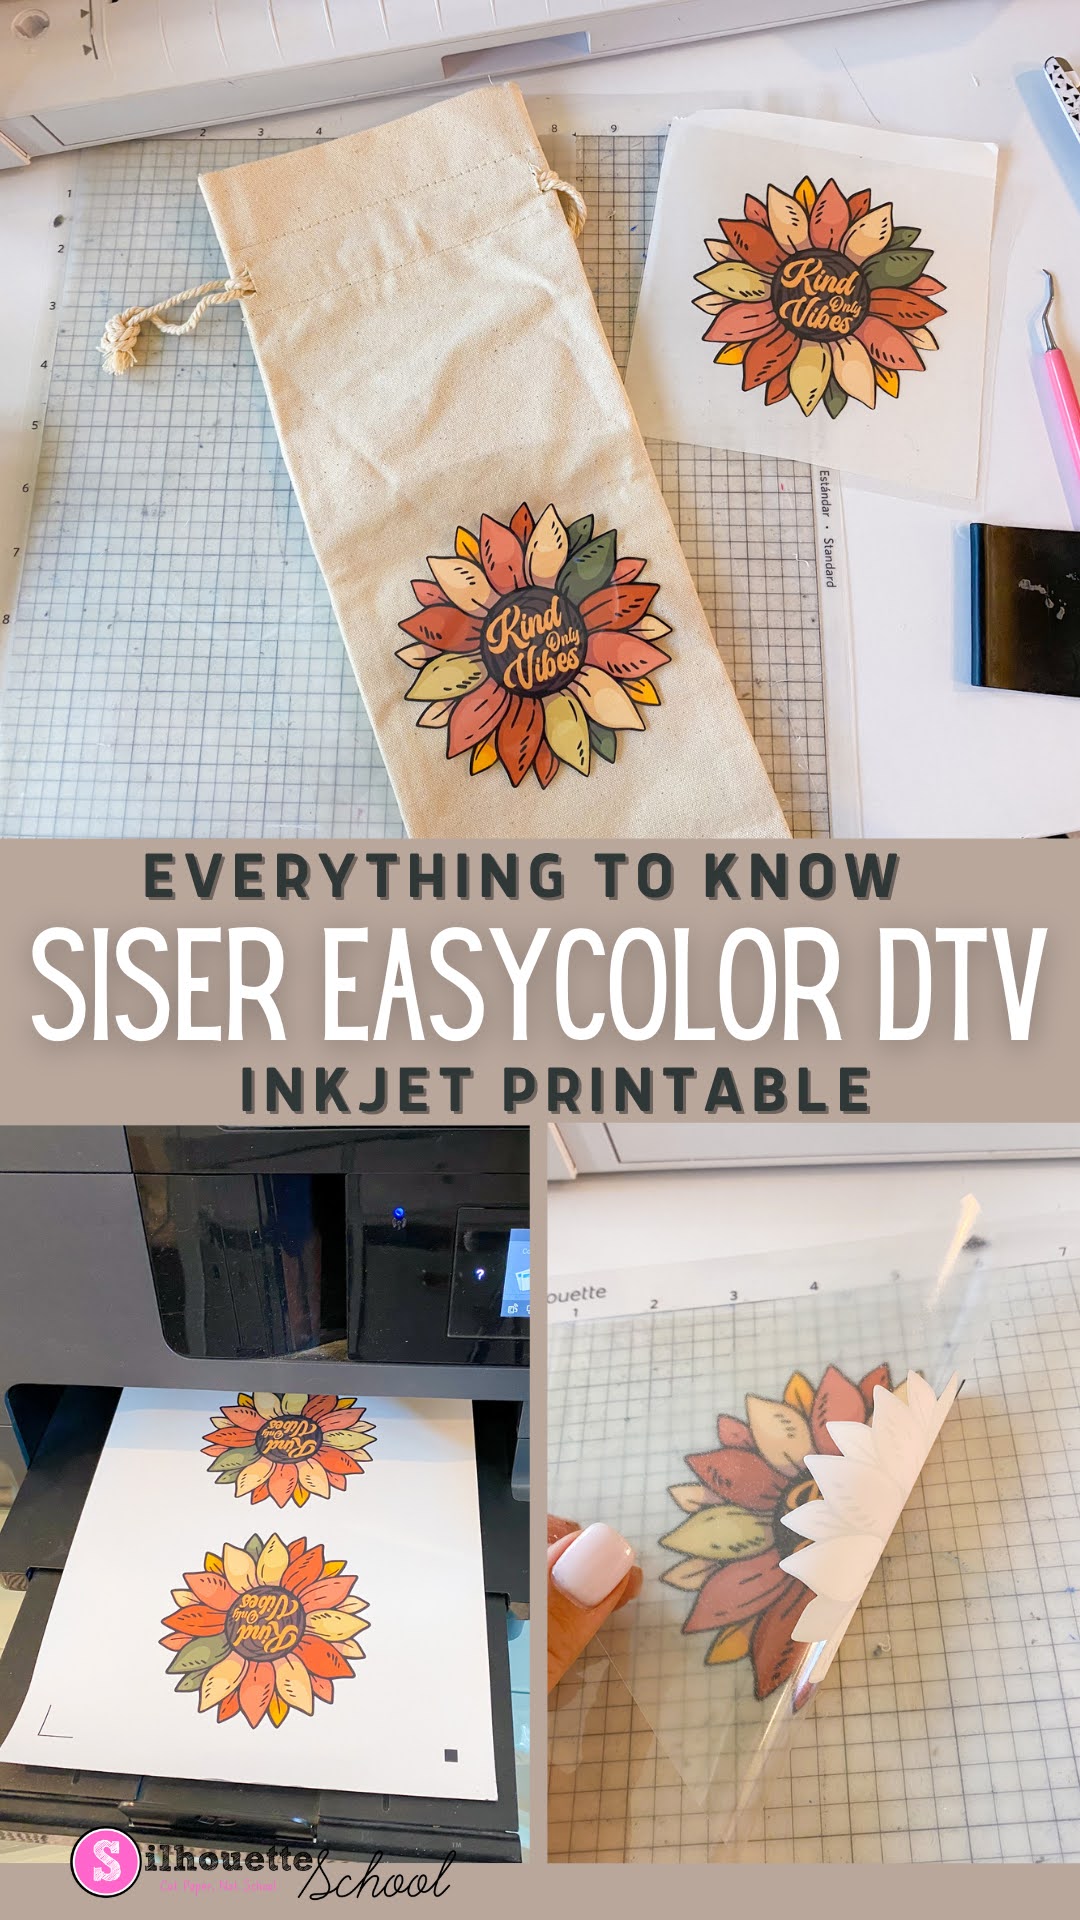 what-is-siser-easycolor-dtv-exactly-everything-to-know-about-the